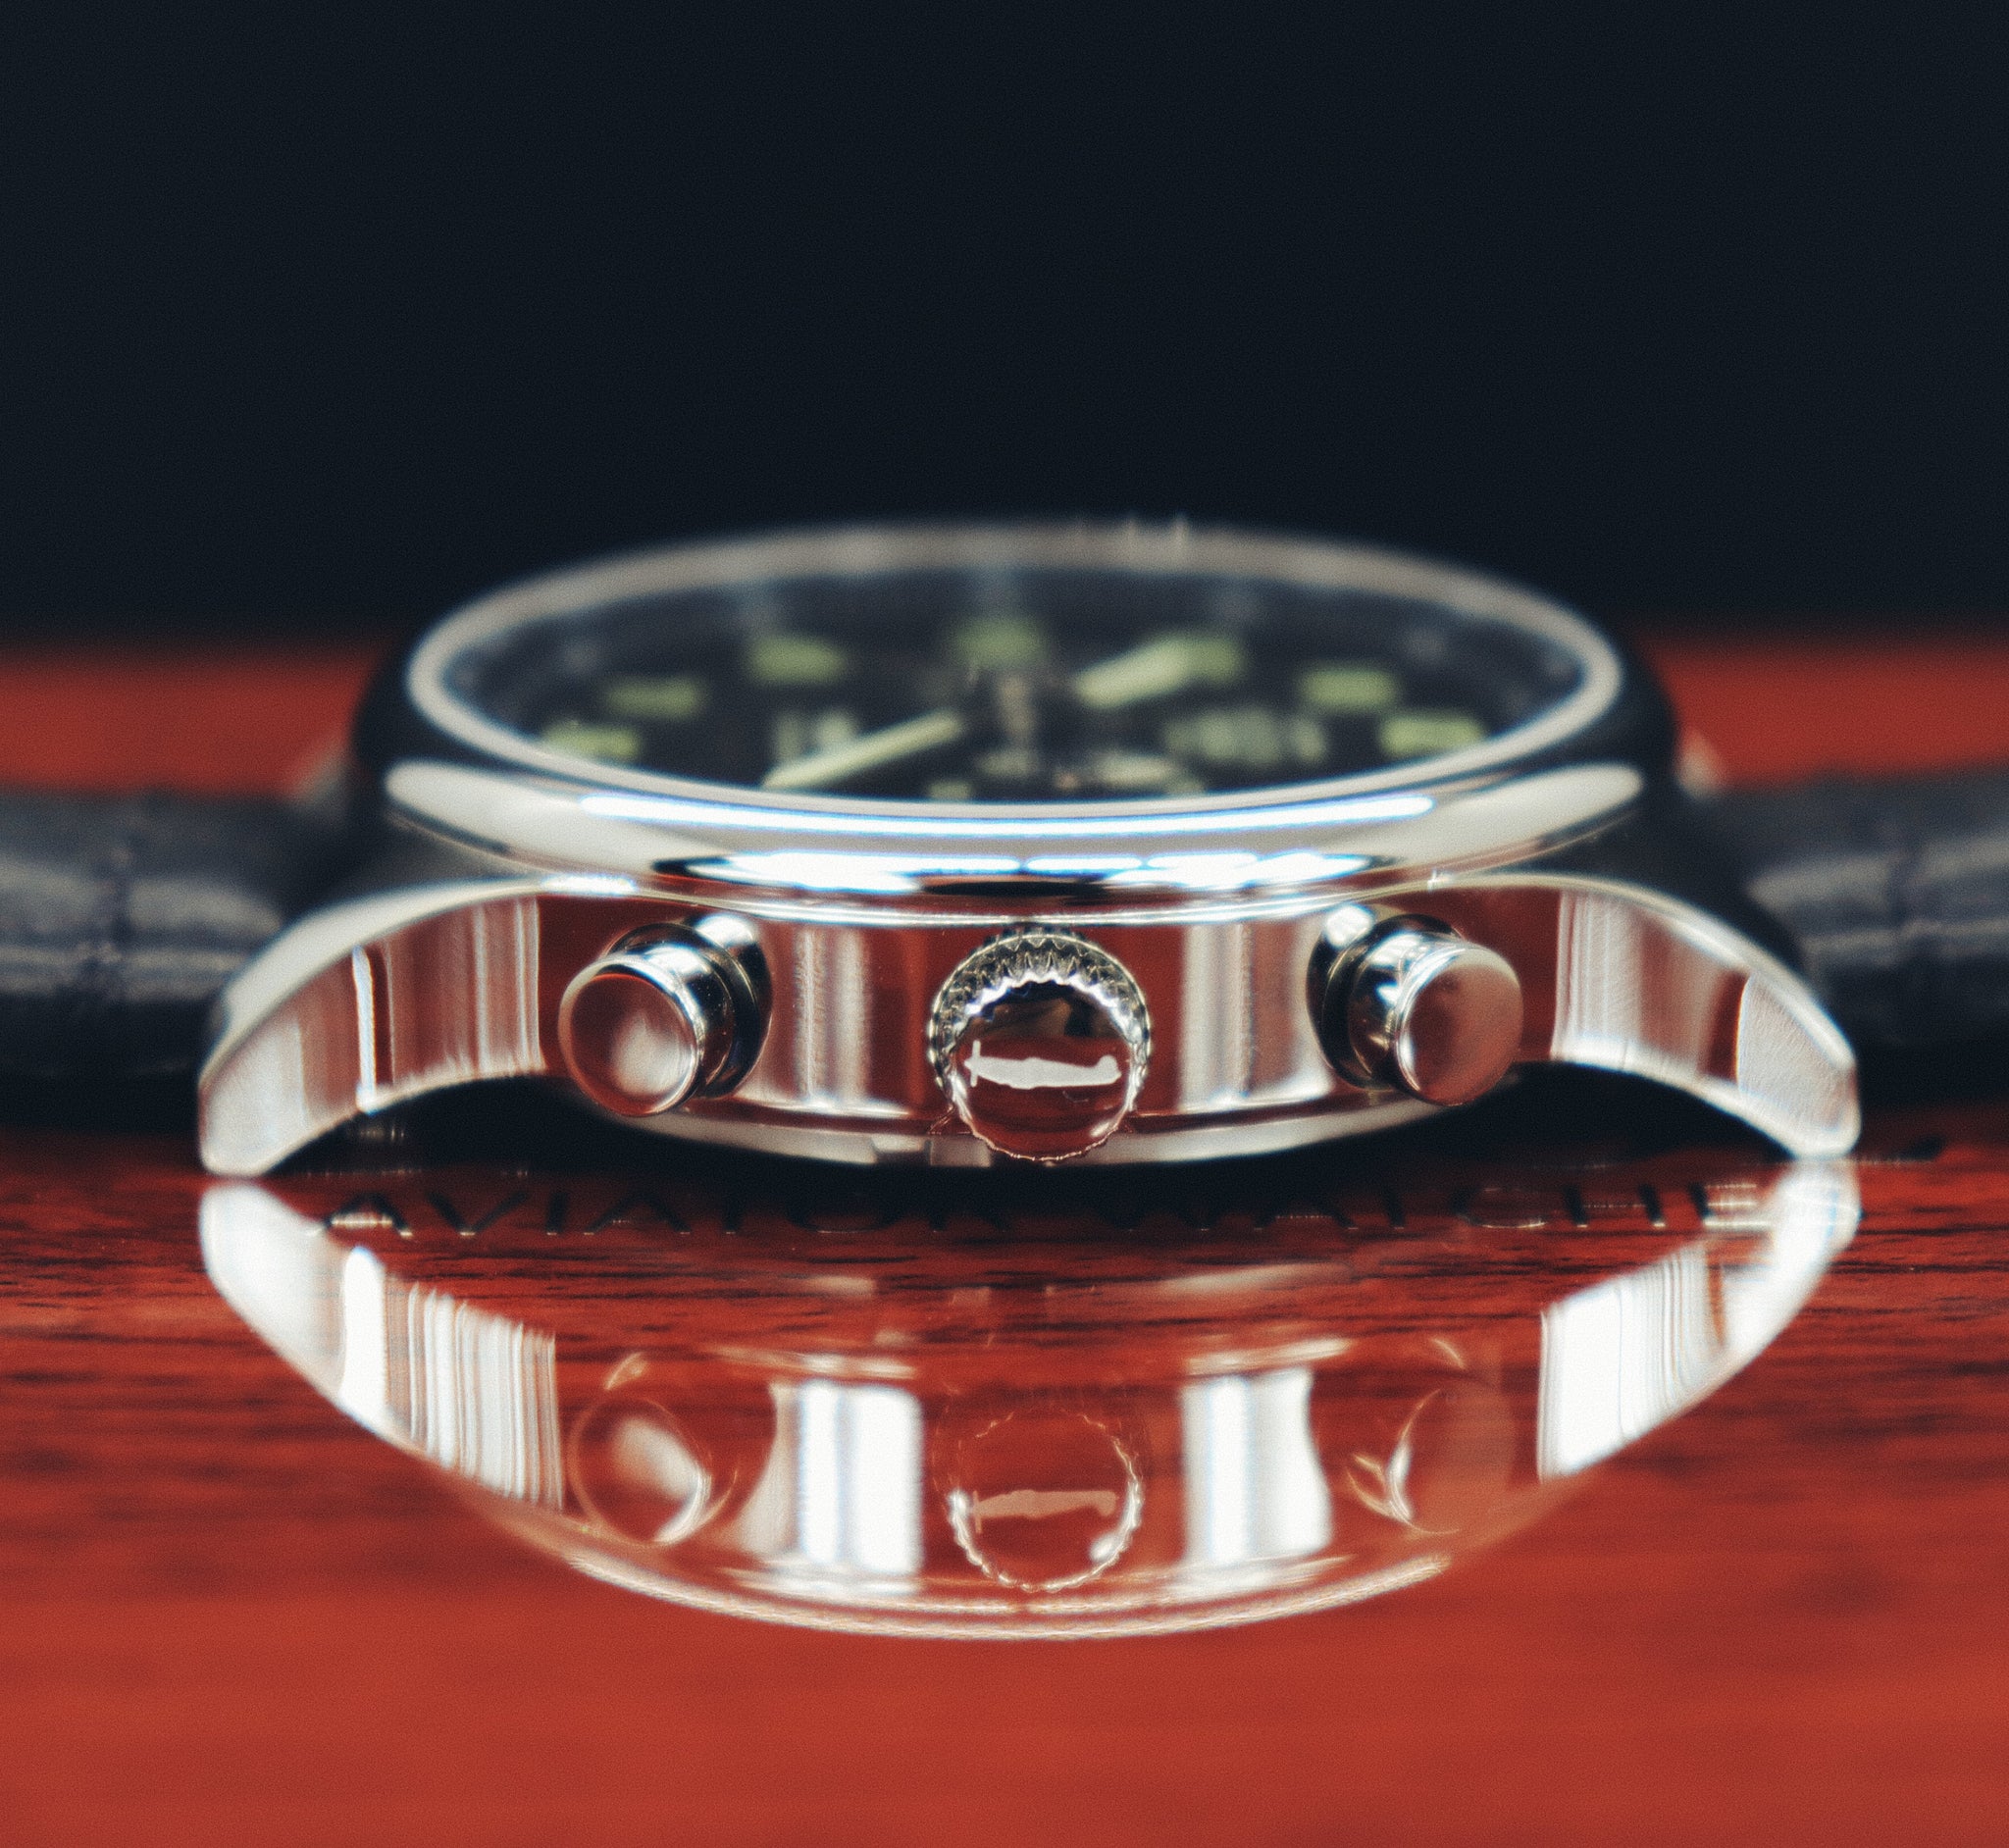 From Spitfires to Watches: REC Looks to Use Metal from Fighter Plane in  Watches - MetalMiner